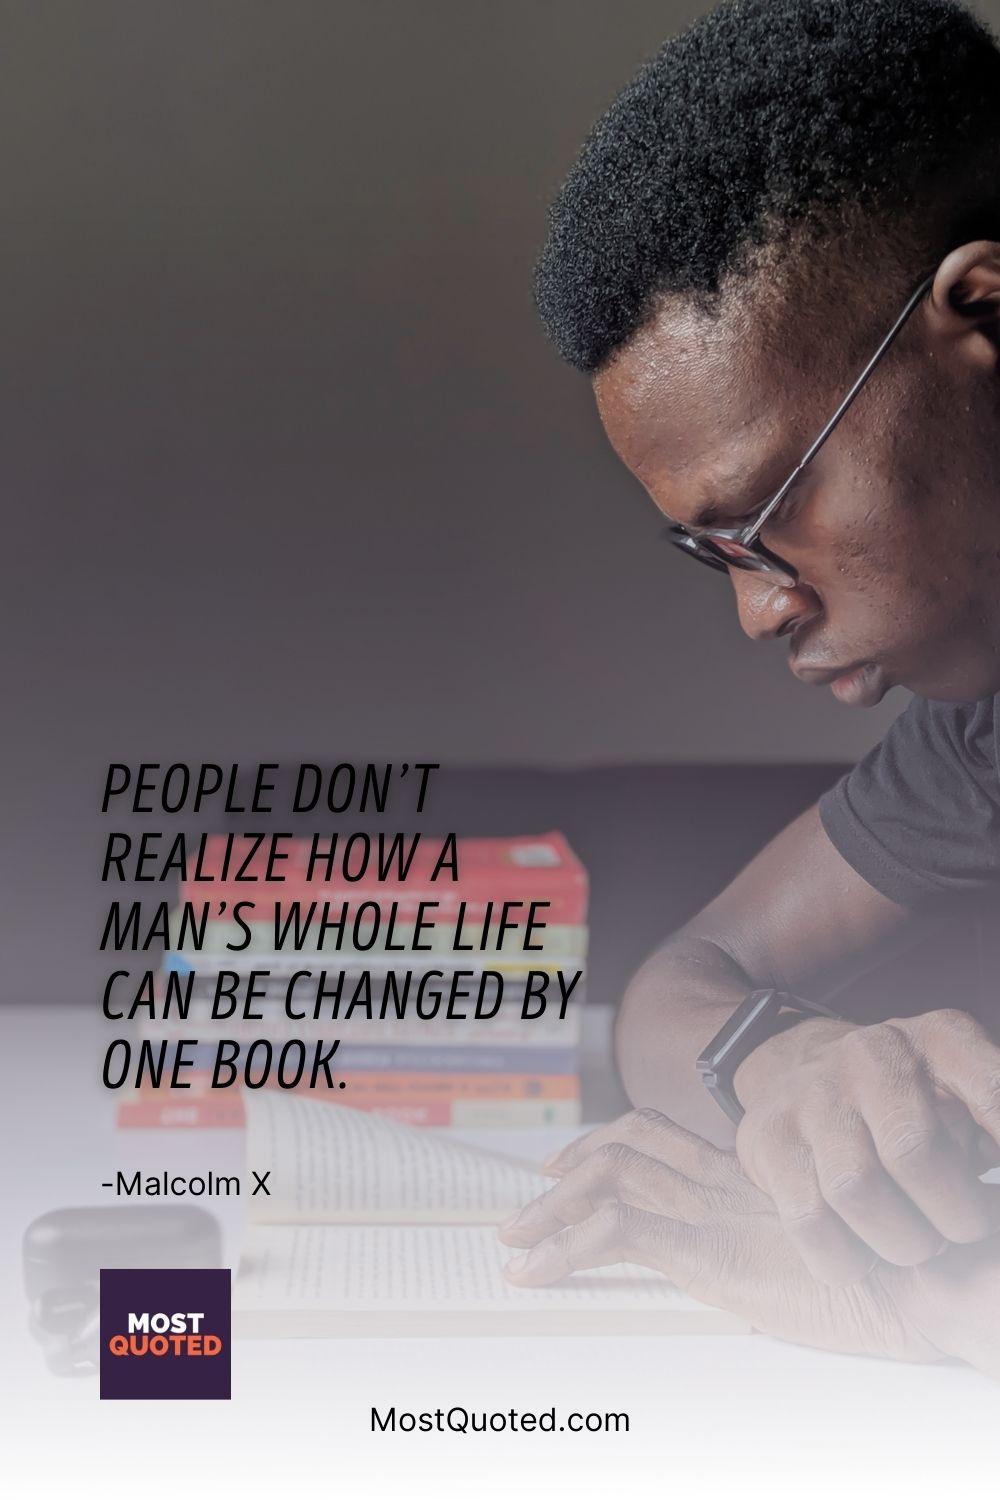 People don’t realize how a man’s whole life can be changed by one book. - Malcolm X